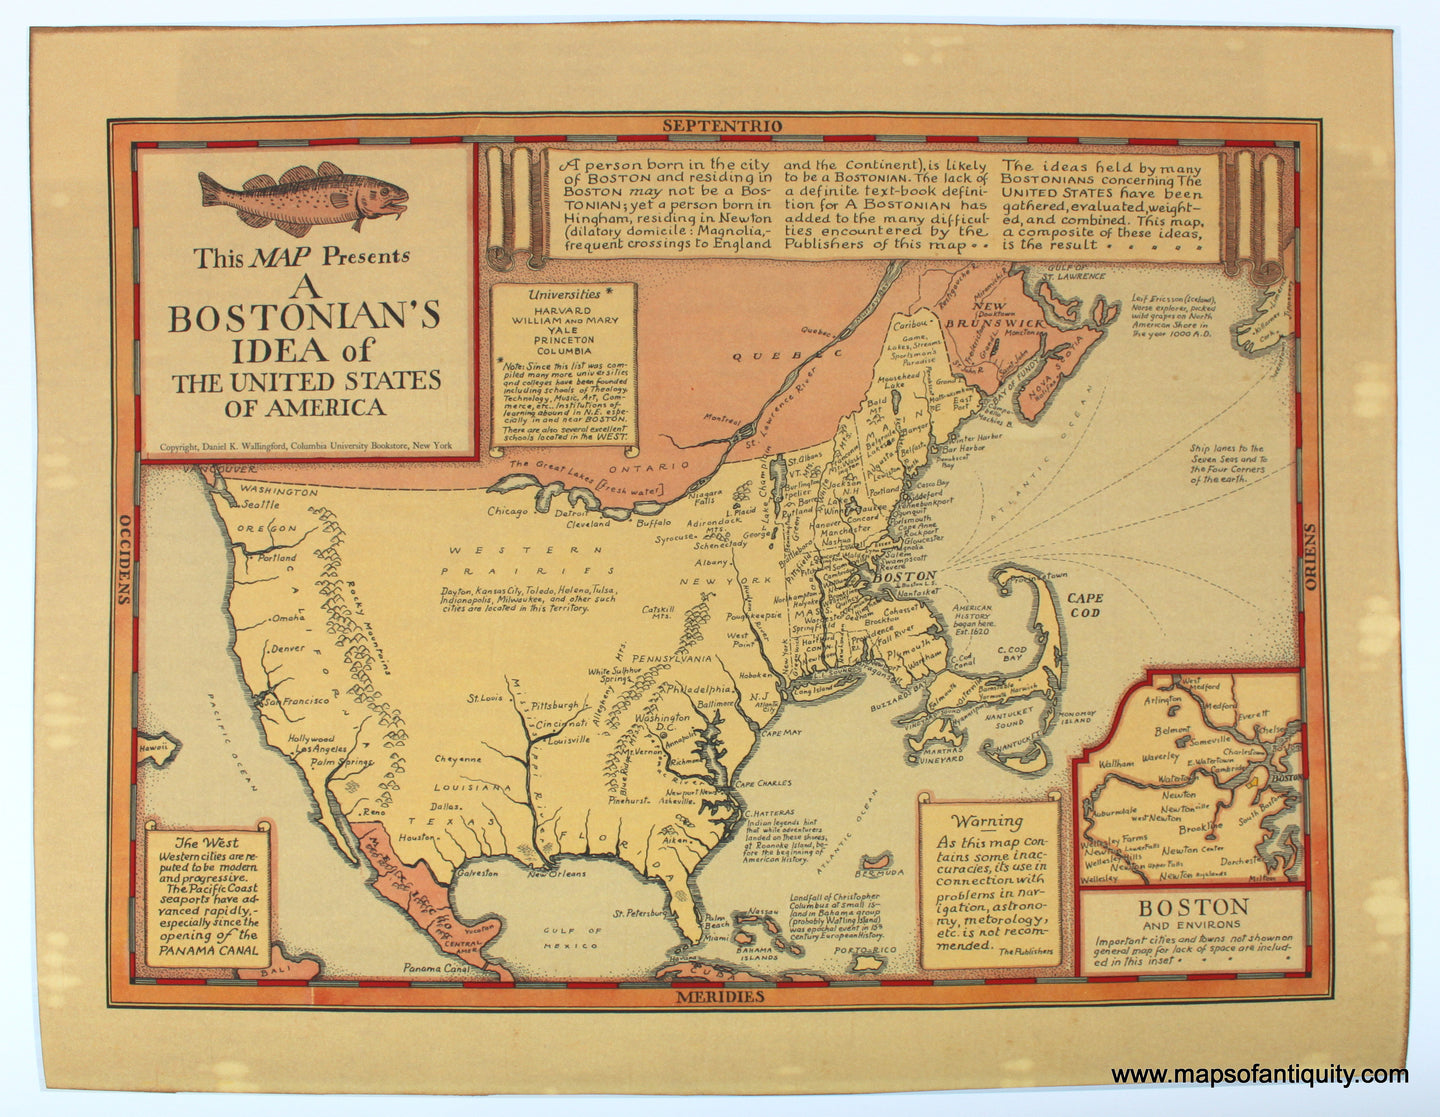 Reproduction-Antique-Map-Pictorial-This-Map-Presents-A-Bostonian's-Idea-of-the-United-States-of-America-c.-1937-Daniel-Wallingford-Maps-of-Antiquity